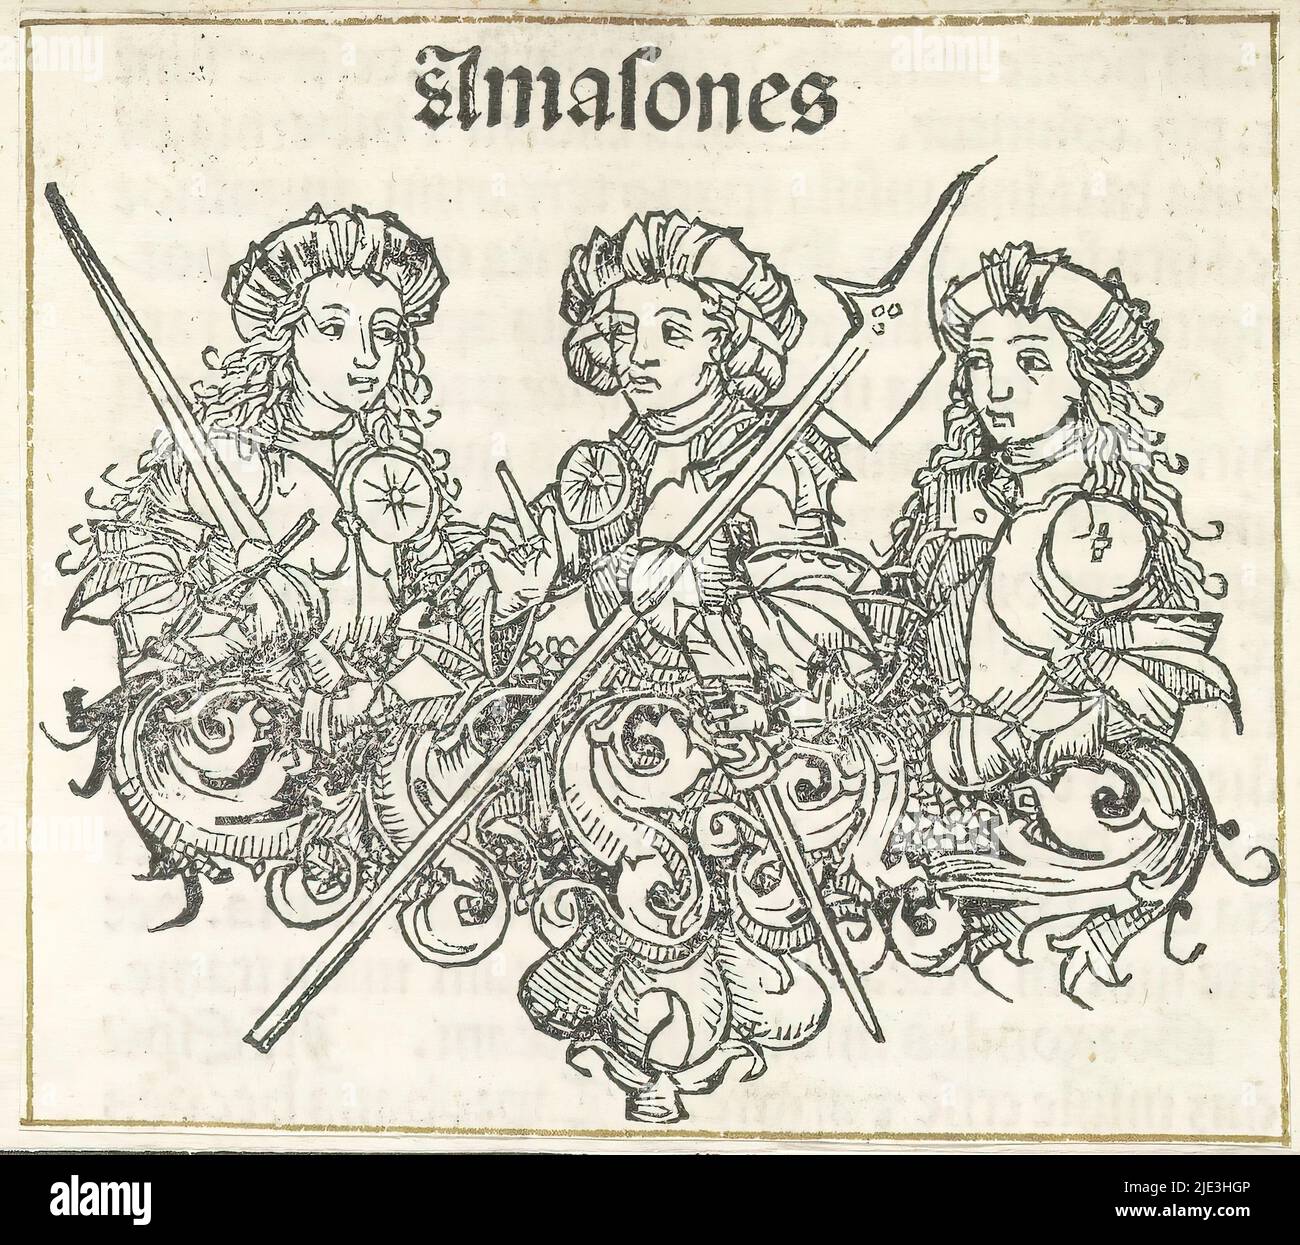 Amazons, Amasones (title on object), Liber Chronicarum (series title), A flower calyx with three Amazons, each dressed in armor and wearing a turban on the head. The first holds a sword, the second a battle axe and the third a dagger. The print is part of an album., print maker: Michel Wolgemut, (workshop of), print maker: Wilhelm Pleydenwurff, (workshop of), Neurenberg, 1493, paper, letterpress printing, height 95 mm × width 107 mm Stock Photo